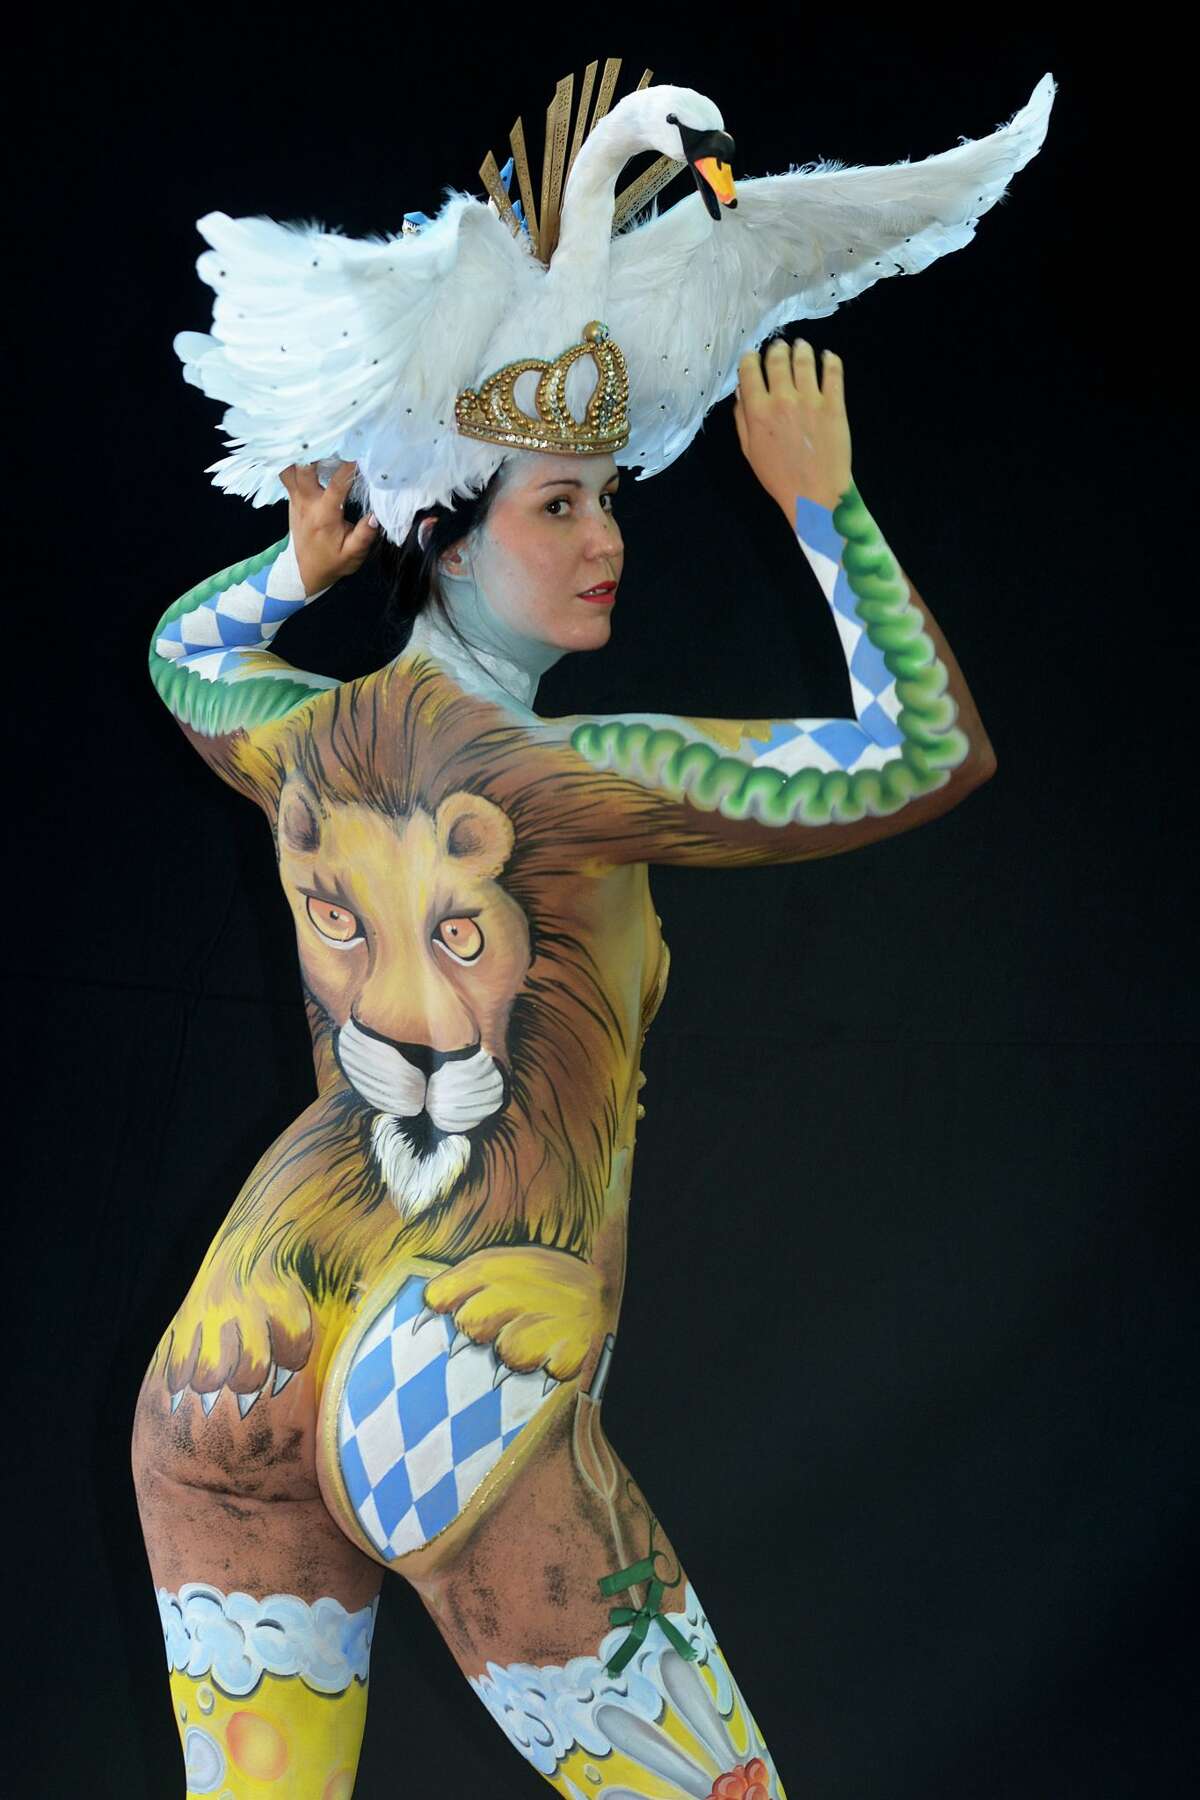 The 15th World Bodypainting Festival in Austria 